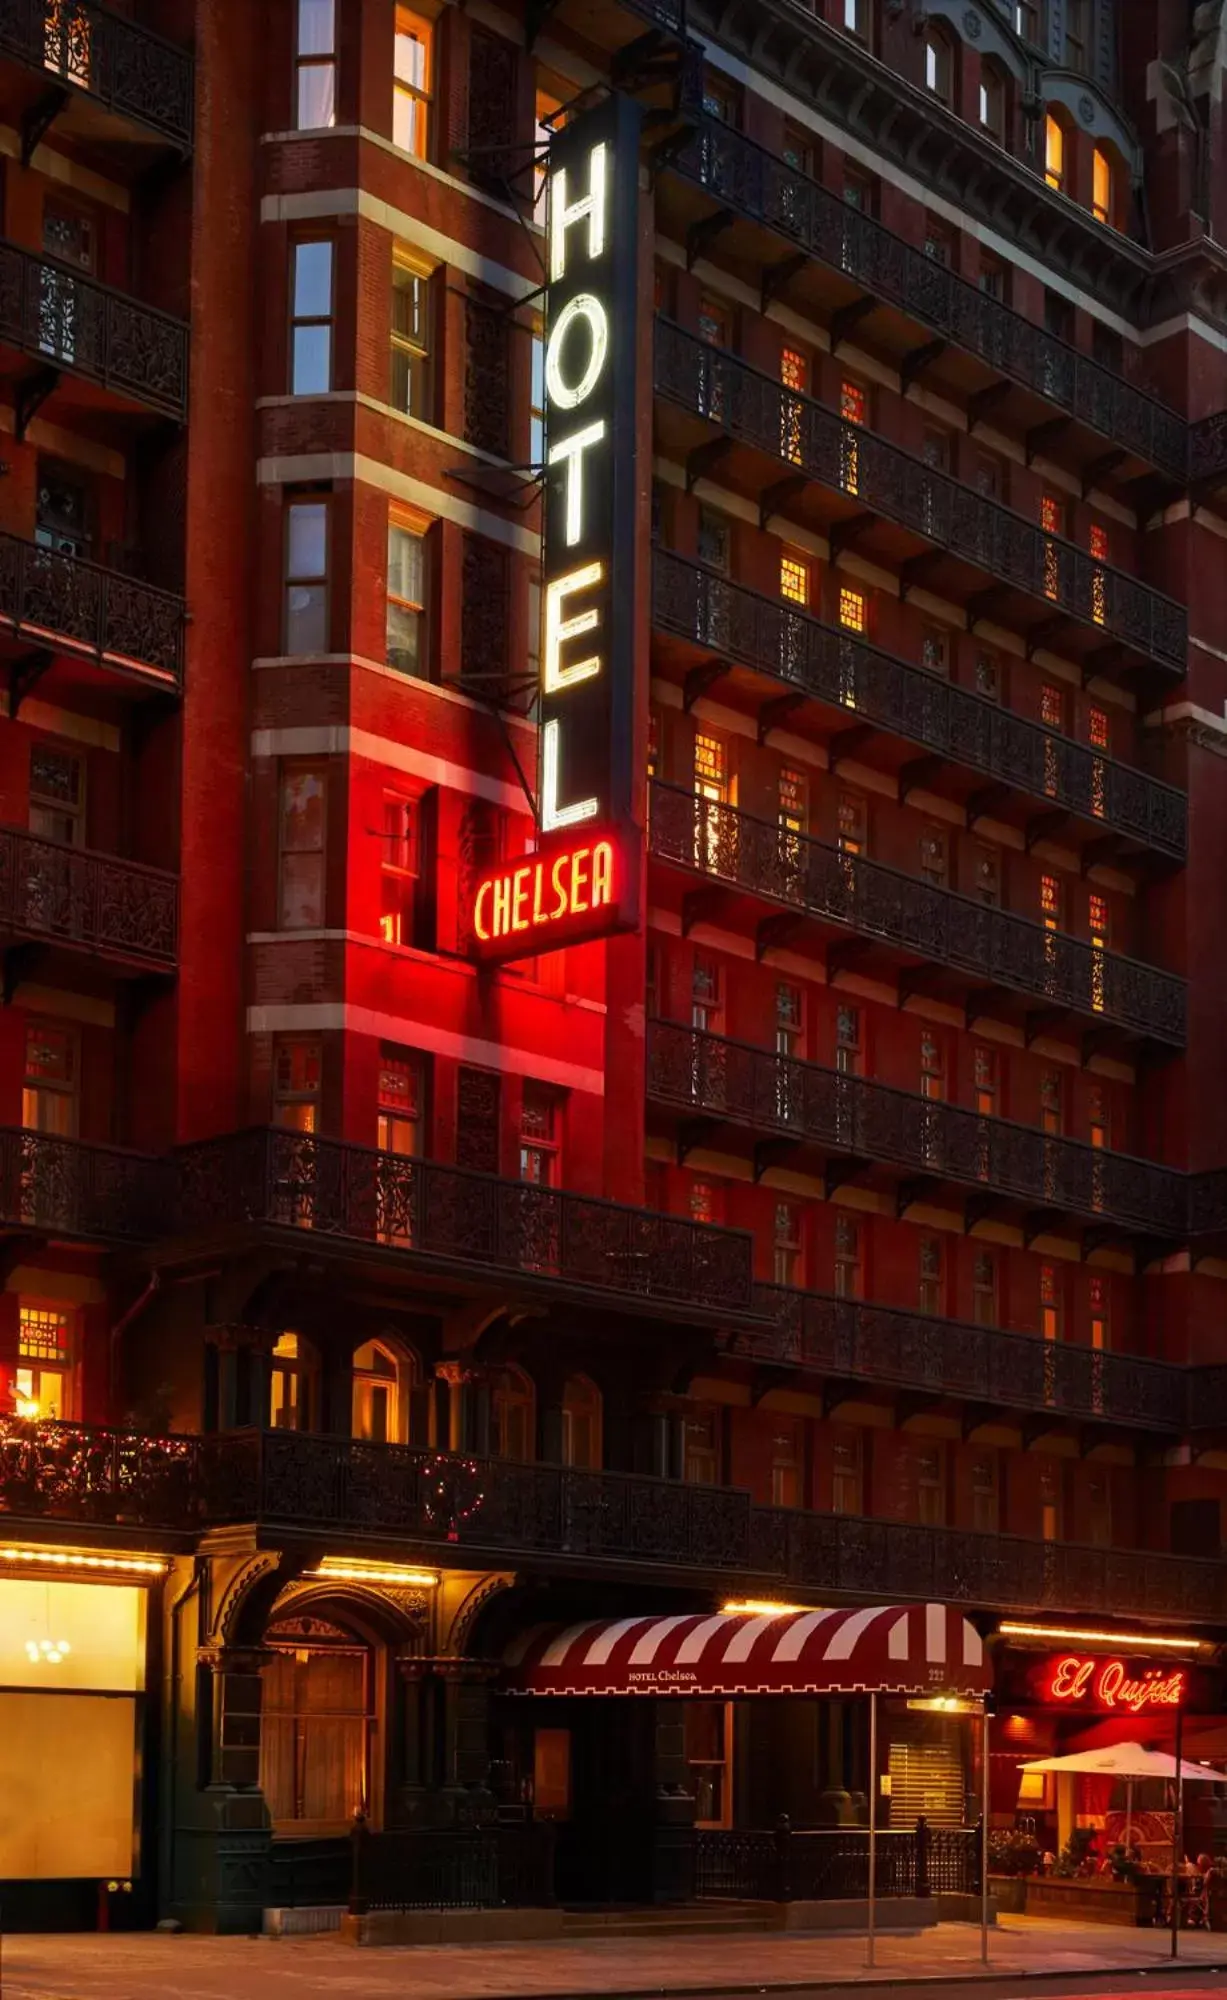 Property Building in The Hotel Chelsea